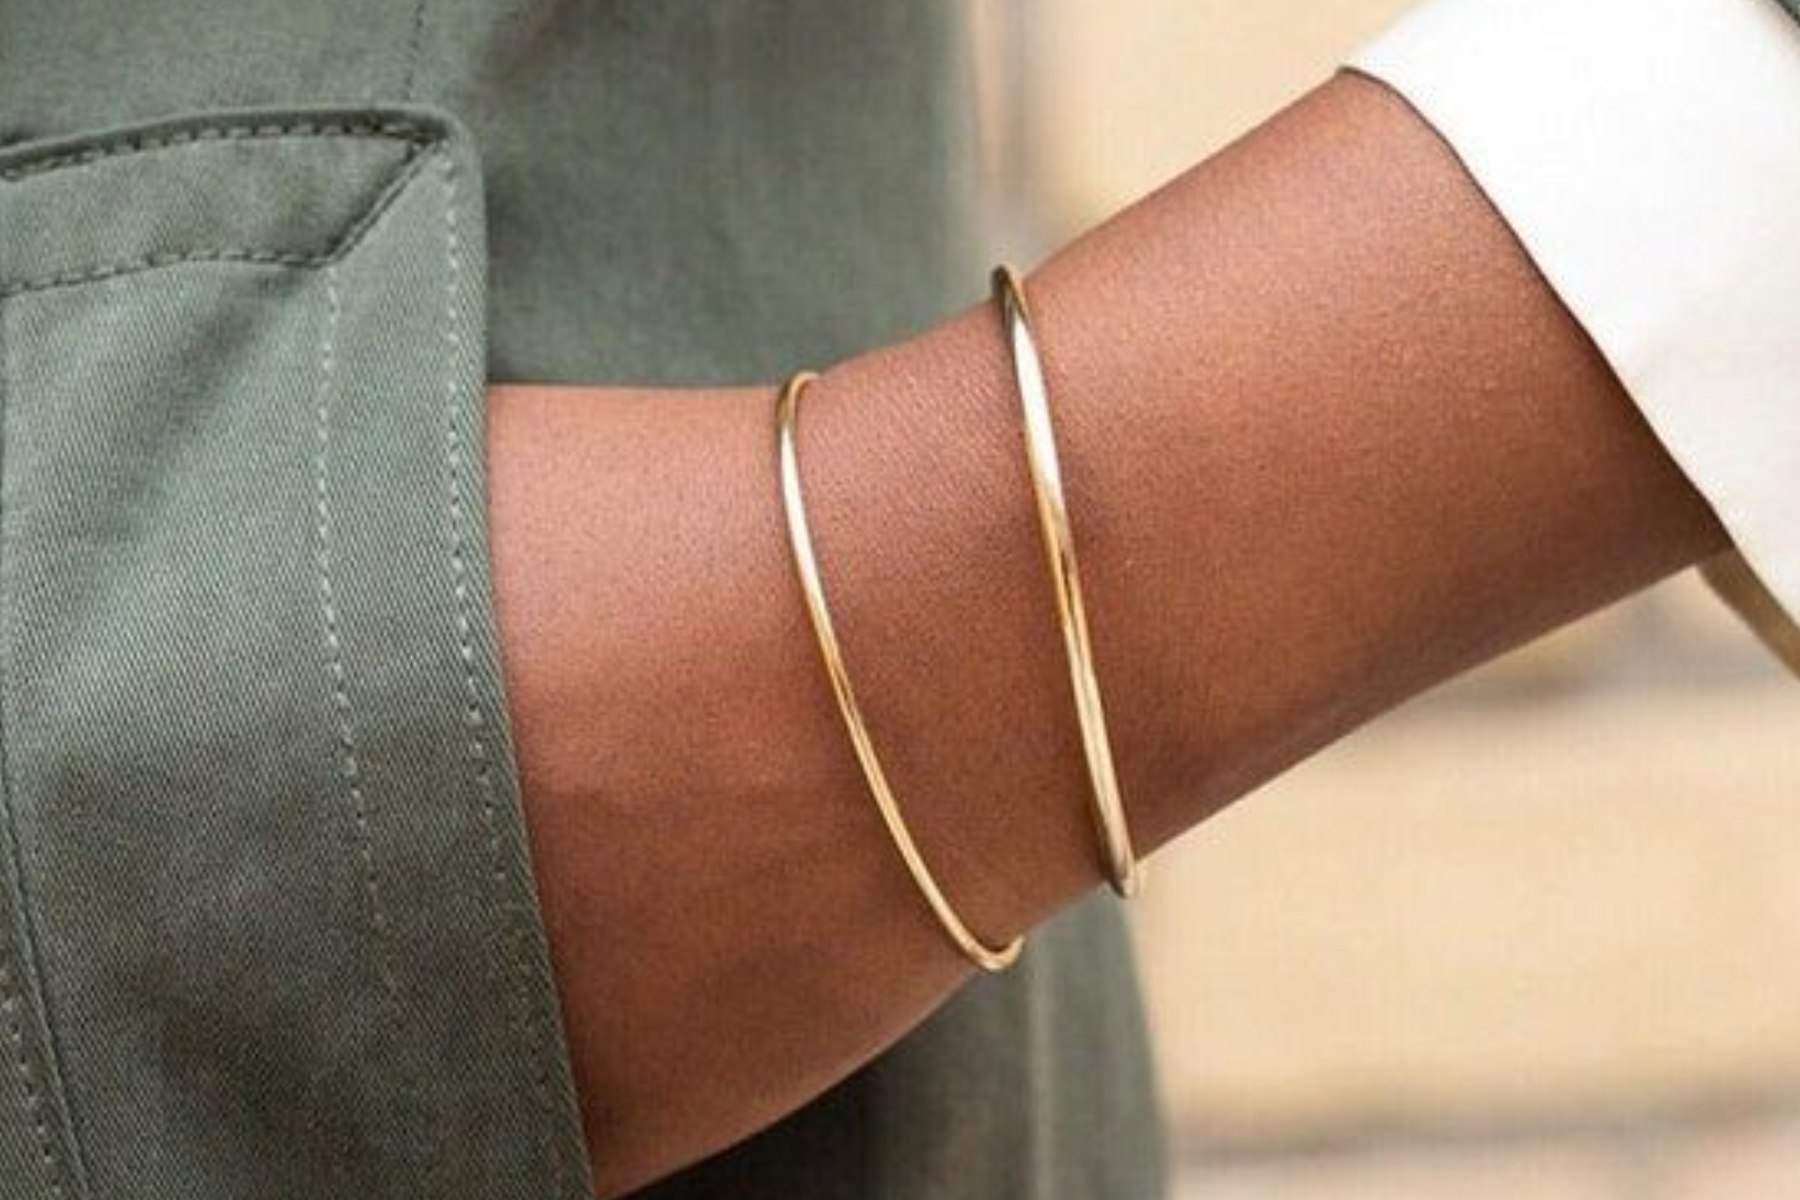 Classic Bracelets Jewelry - Unveiling The Latest Trends